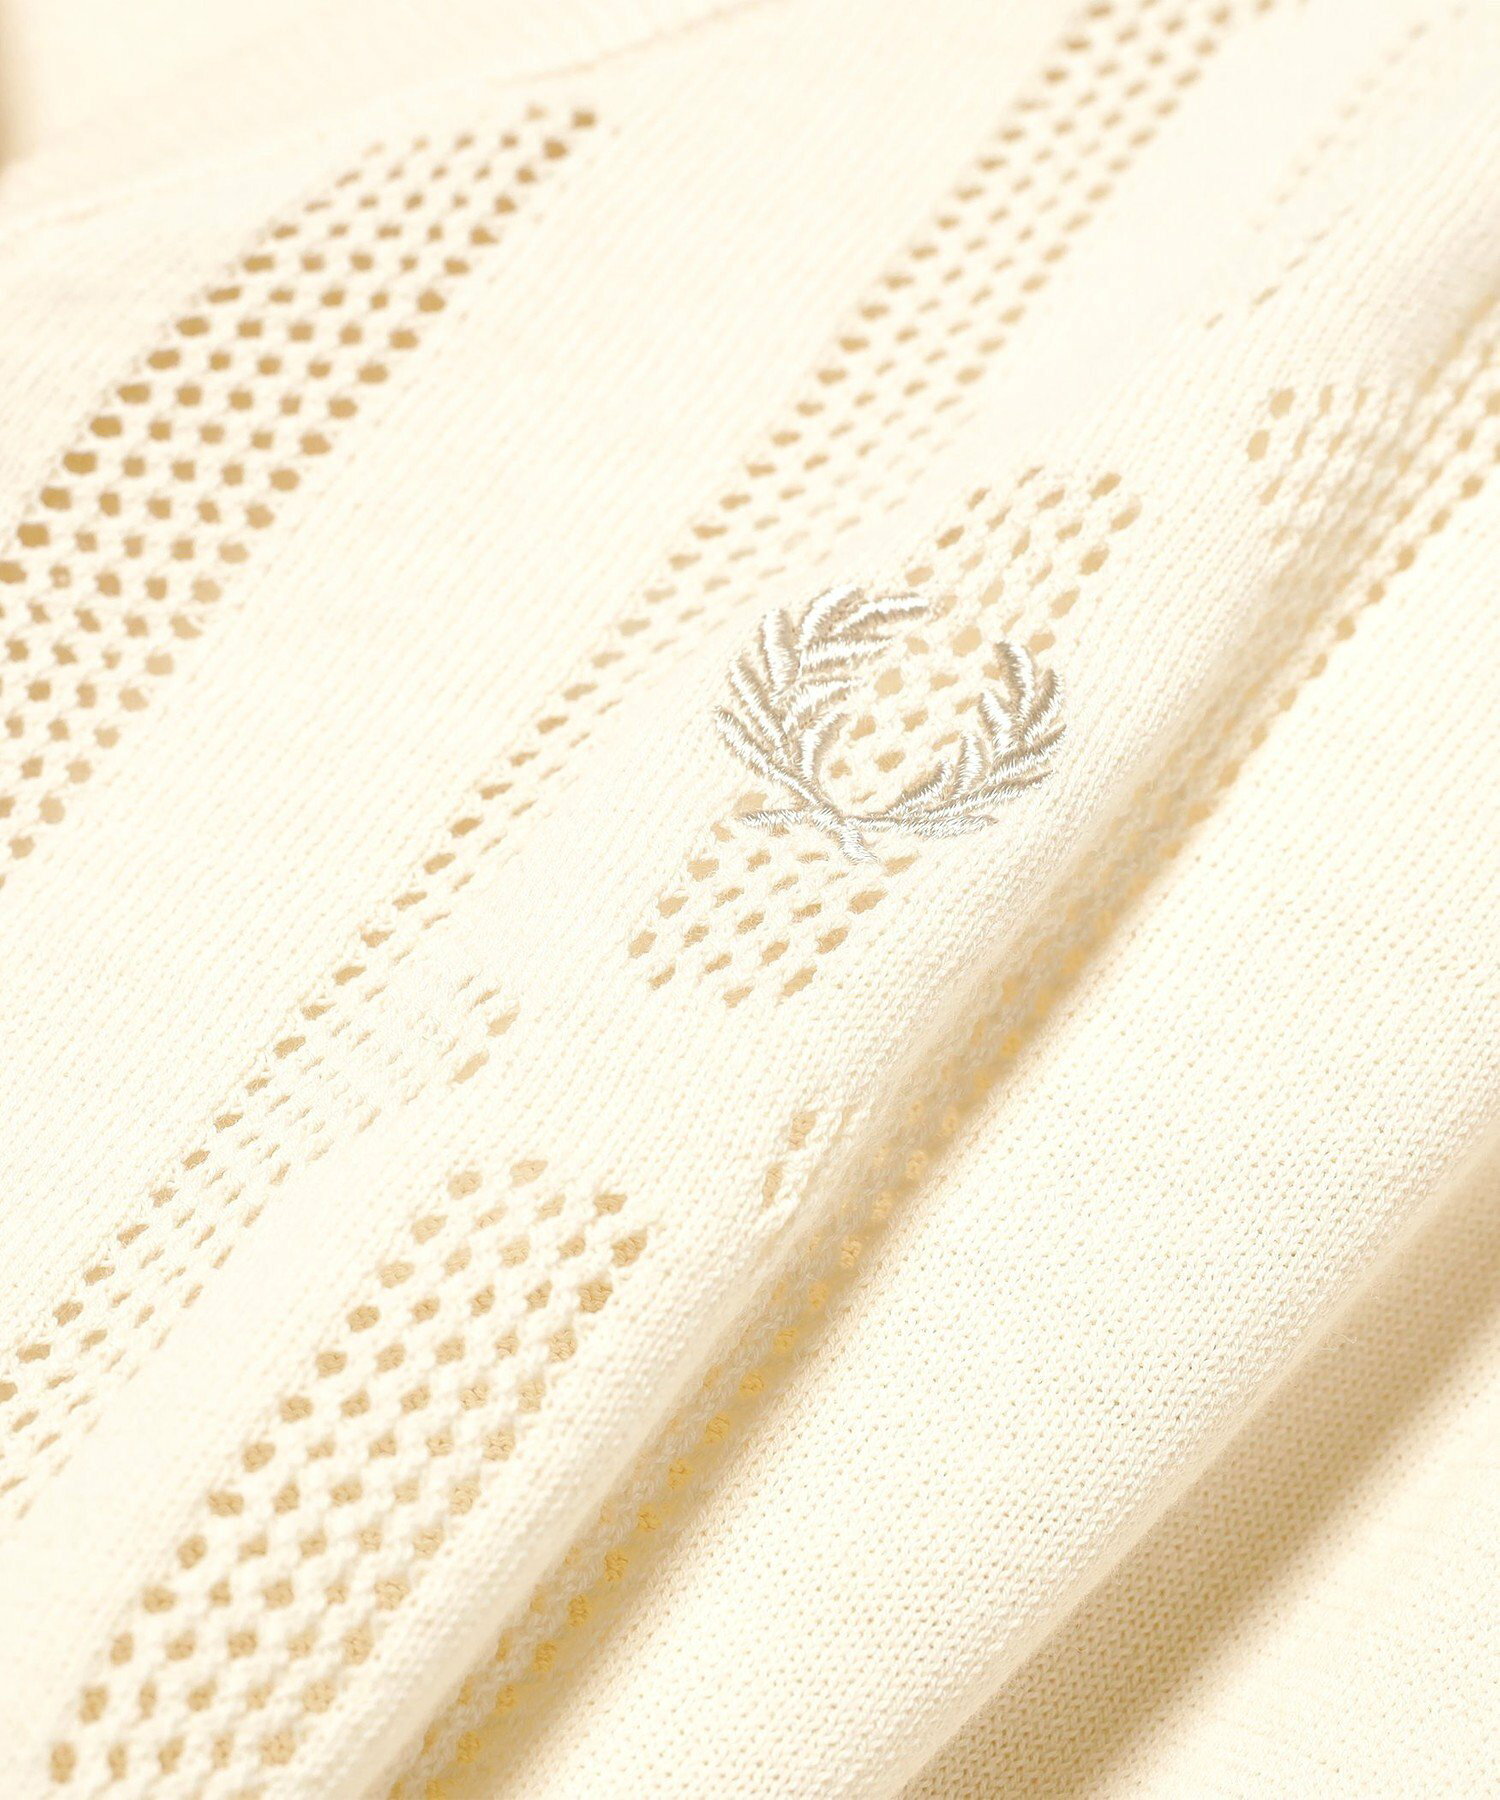 FRED PERRY * Ray BEAMS / 別注 Open Knit Cardigan